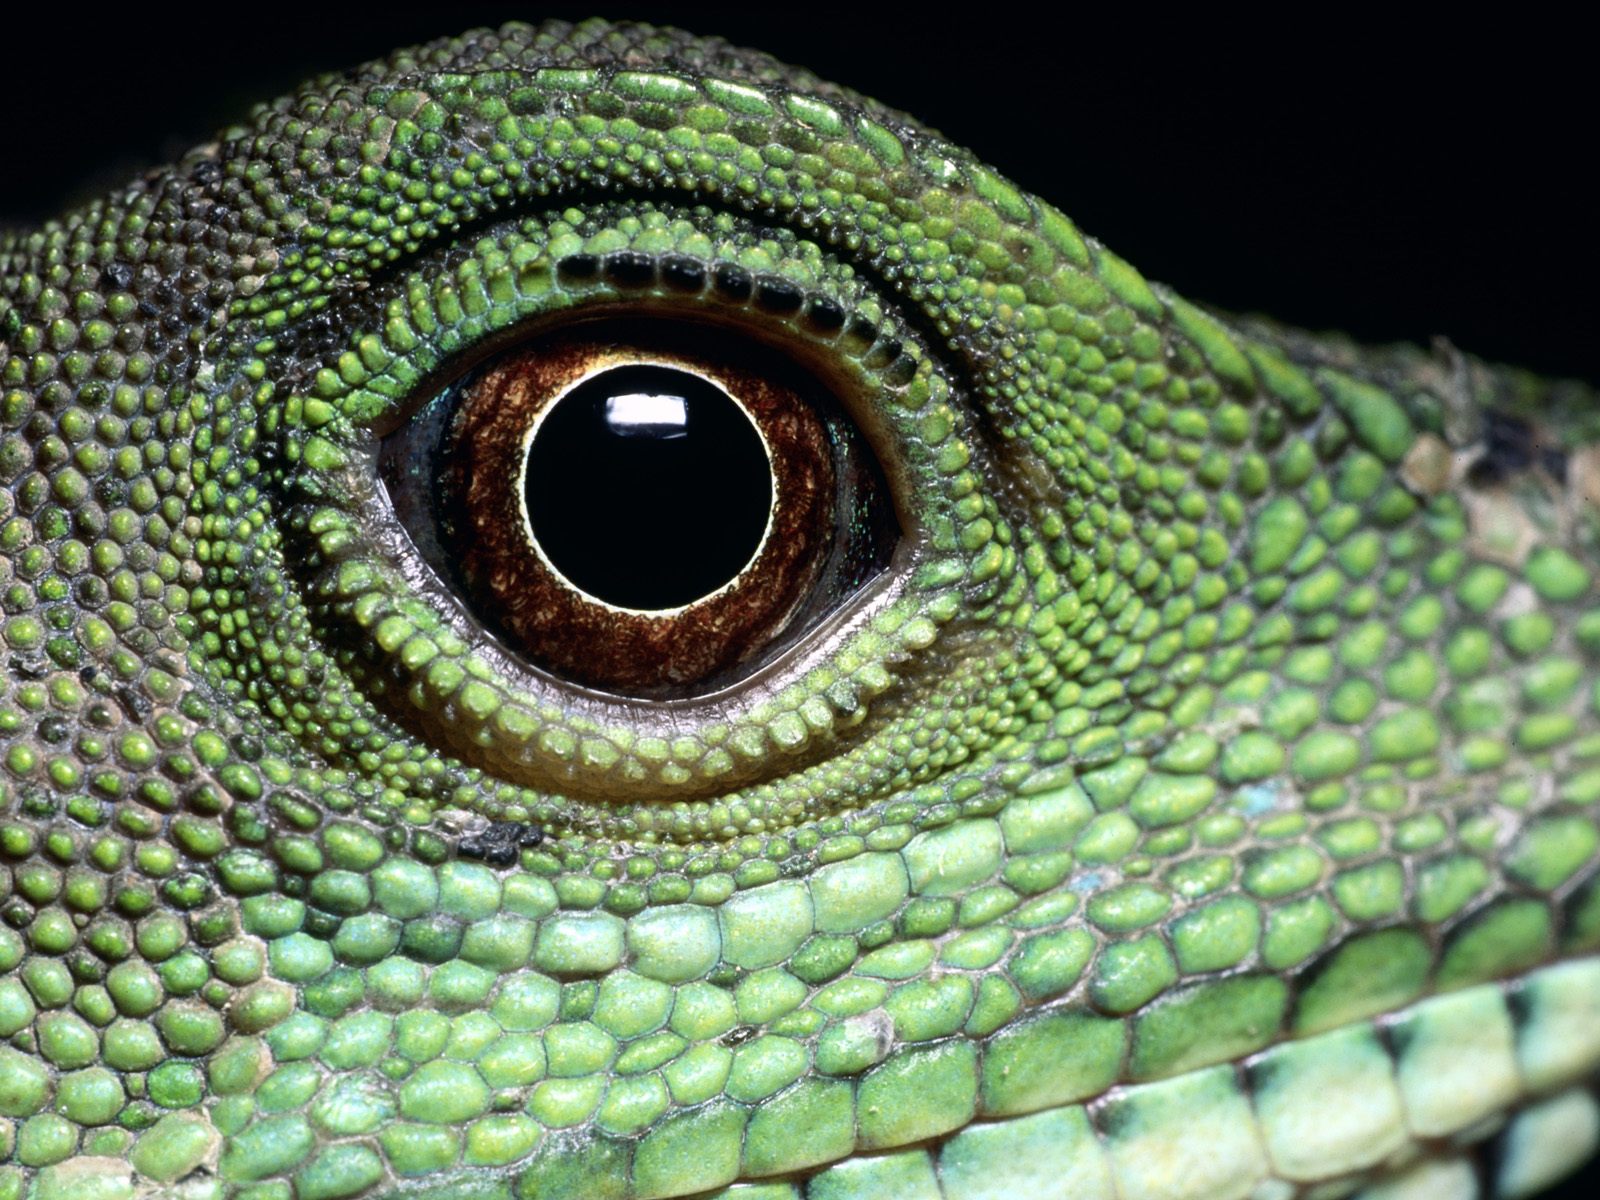 Download Background - Reptile Close-Up - Free Cool Backgrounds and ...